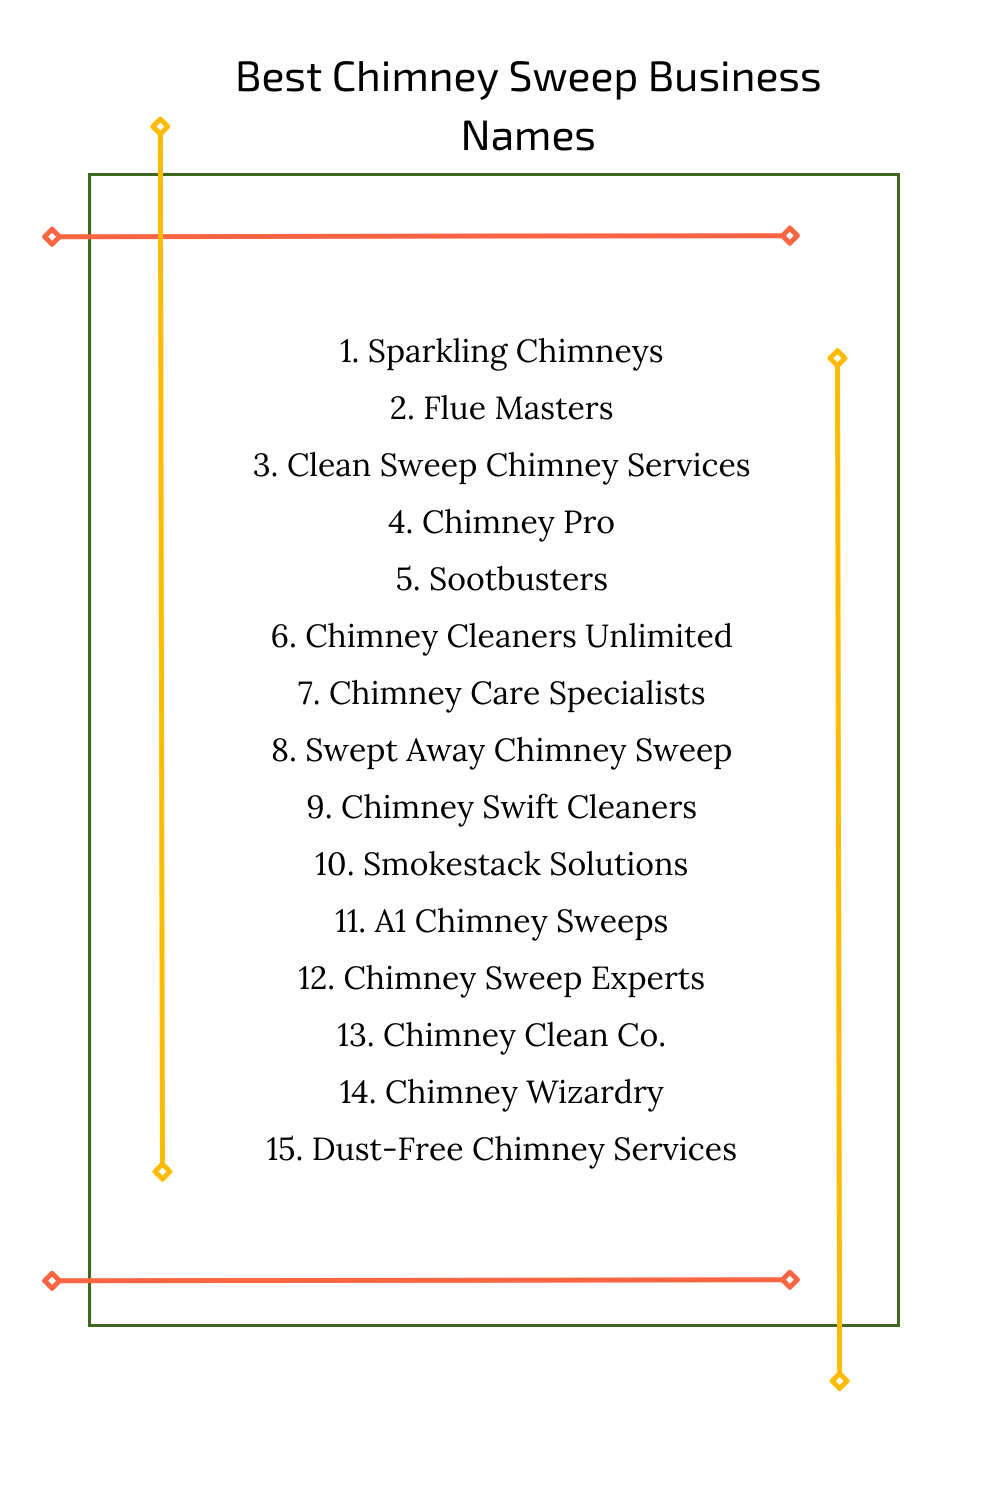 Best Chimney Sweep Business Names 